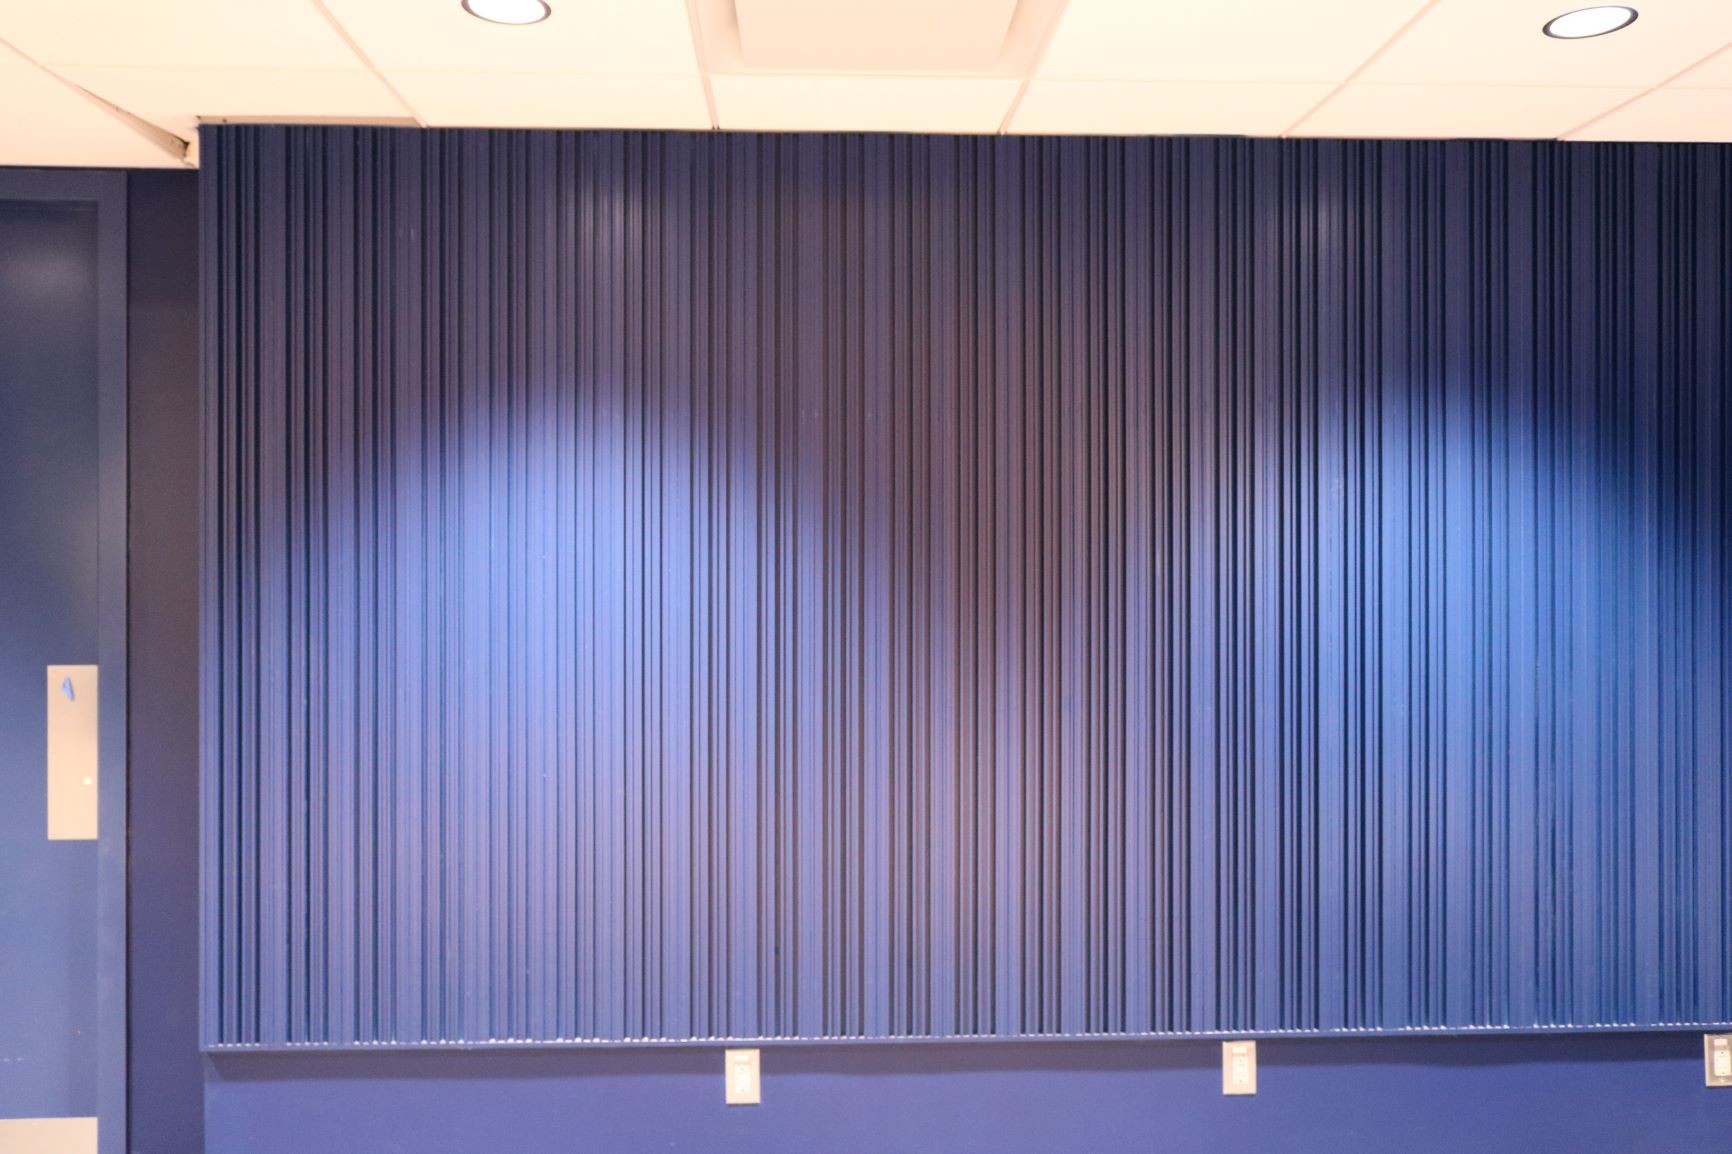 The wall opposite the stage features acoustic wood paneling